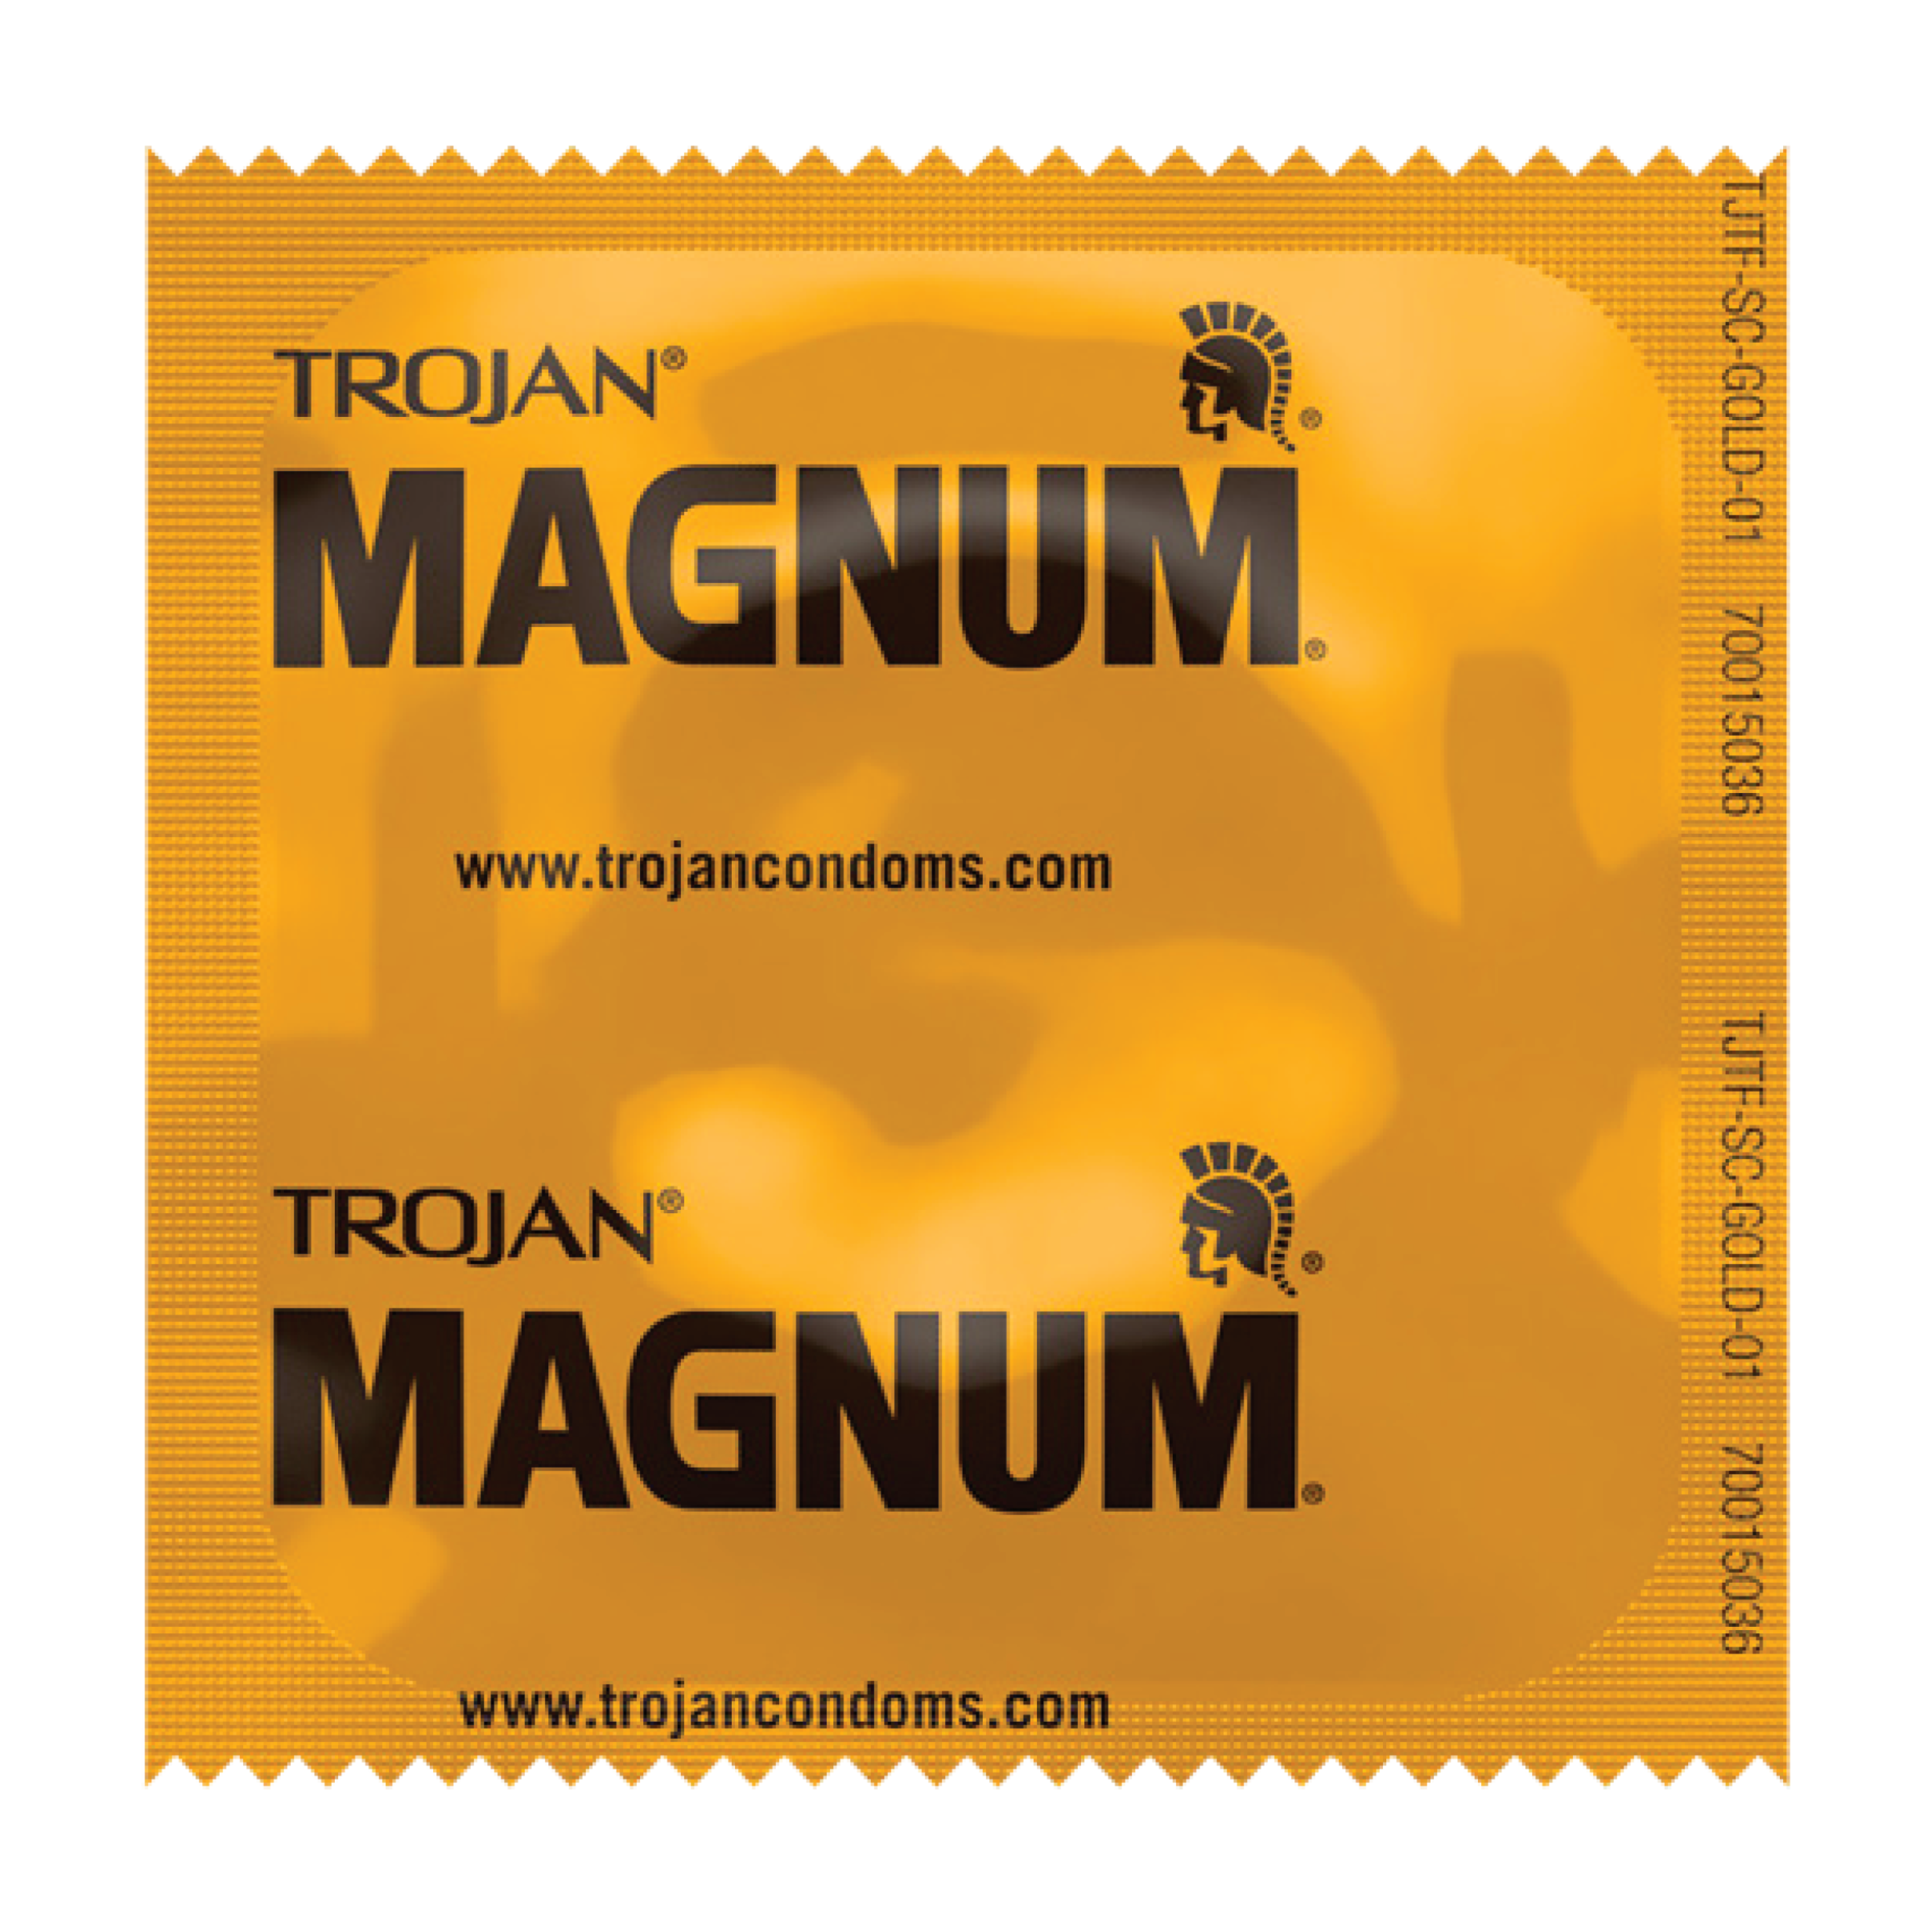 https://cdn.shopify.com/s/files/1/1025/2425/products/Magnum.png?v=1651241629